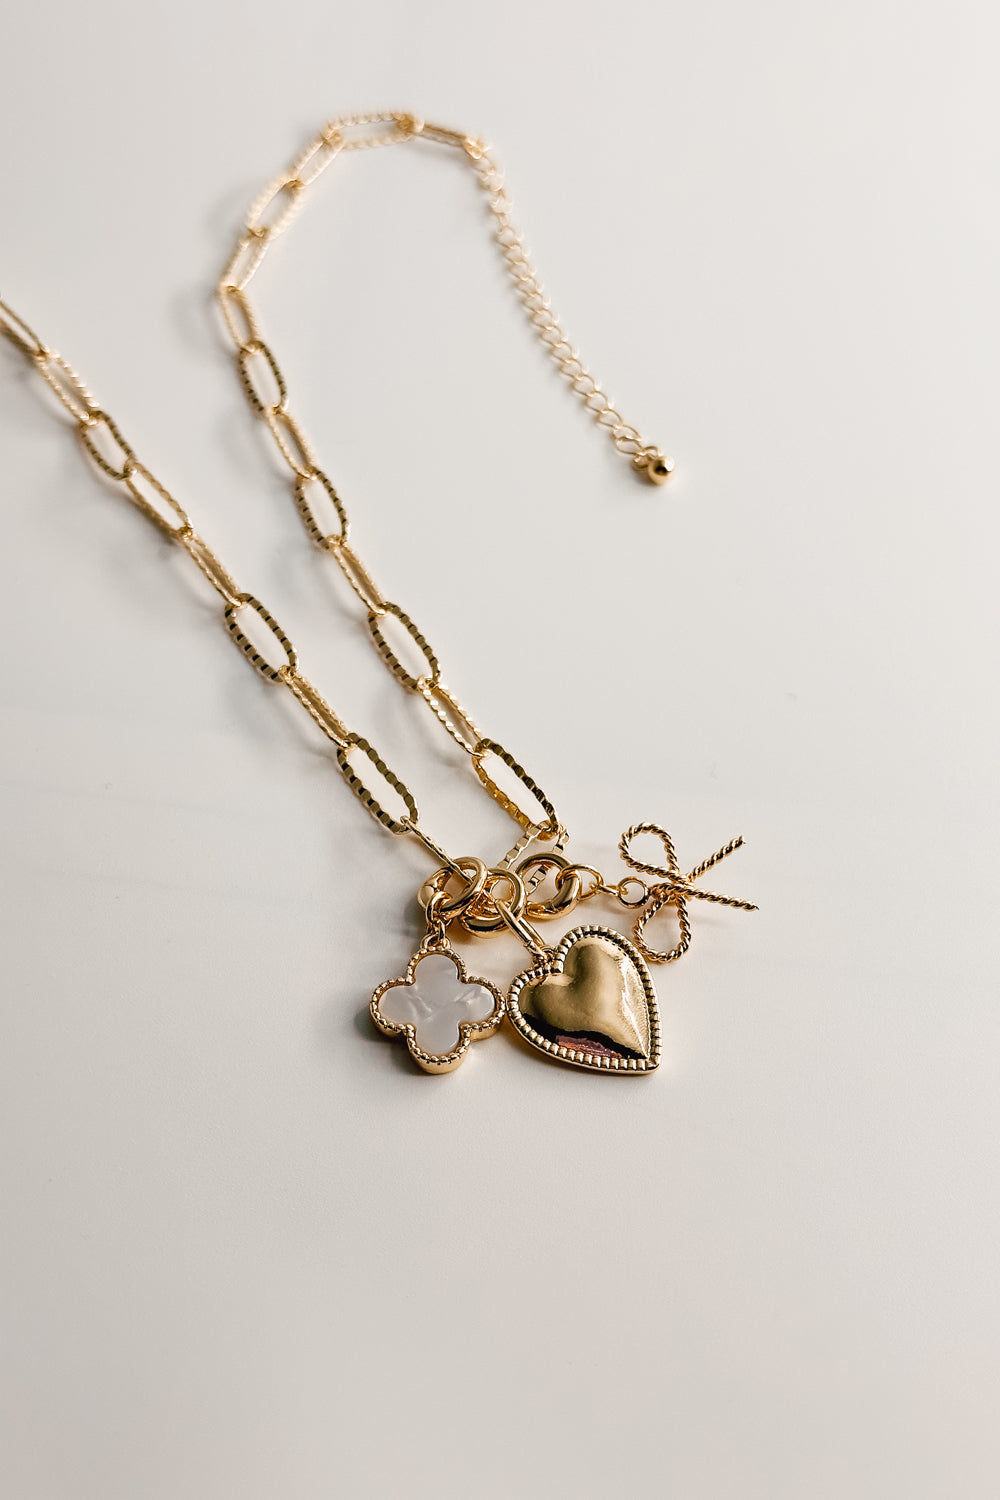 Image shows gold necklace chain with white clover charm, heart charm, and rope bow charm. Shown against a white background.